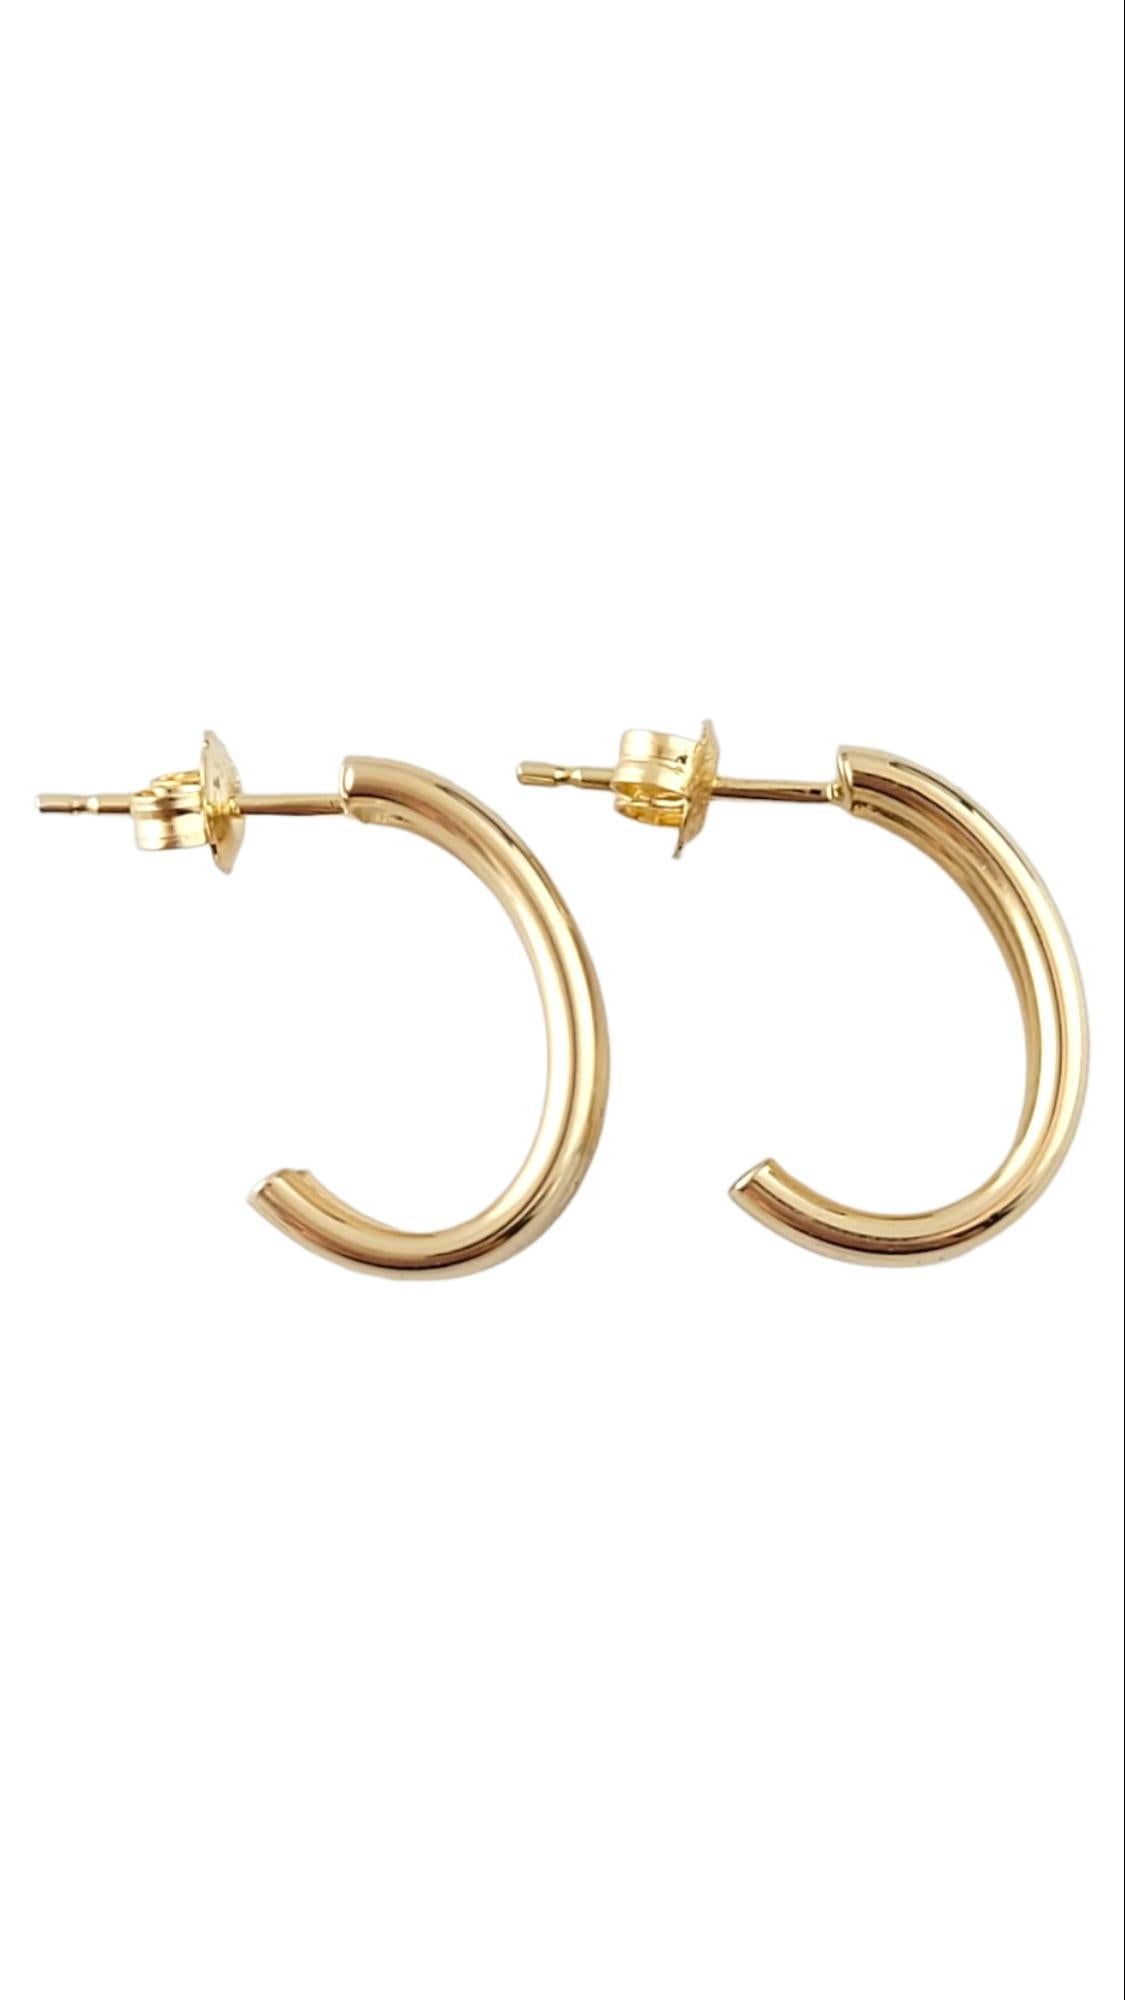 14K Yellow and White Gold Two Tone Hoops

This gorgeous set of hoop earrings are crafted from both 14K white and yellow gold for a beautiful finish!

Size: 16.5mm X 10.2mm X 7.9mm

Weight: 3.35 g/ 2.2 dwt

Hallmark: 585

Very good condition,